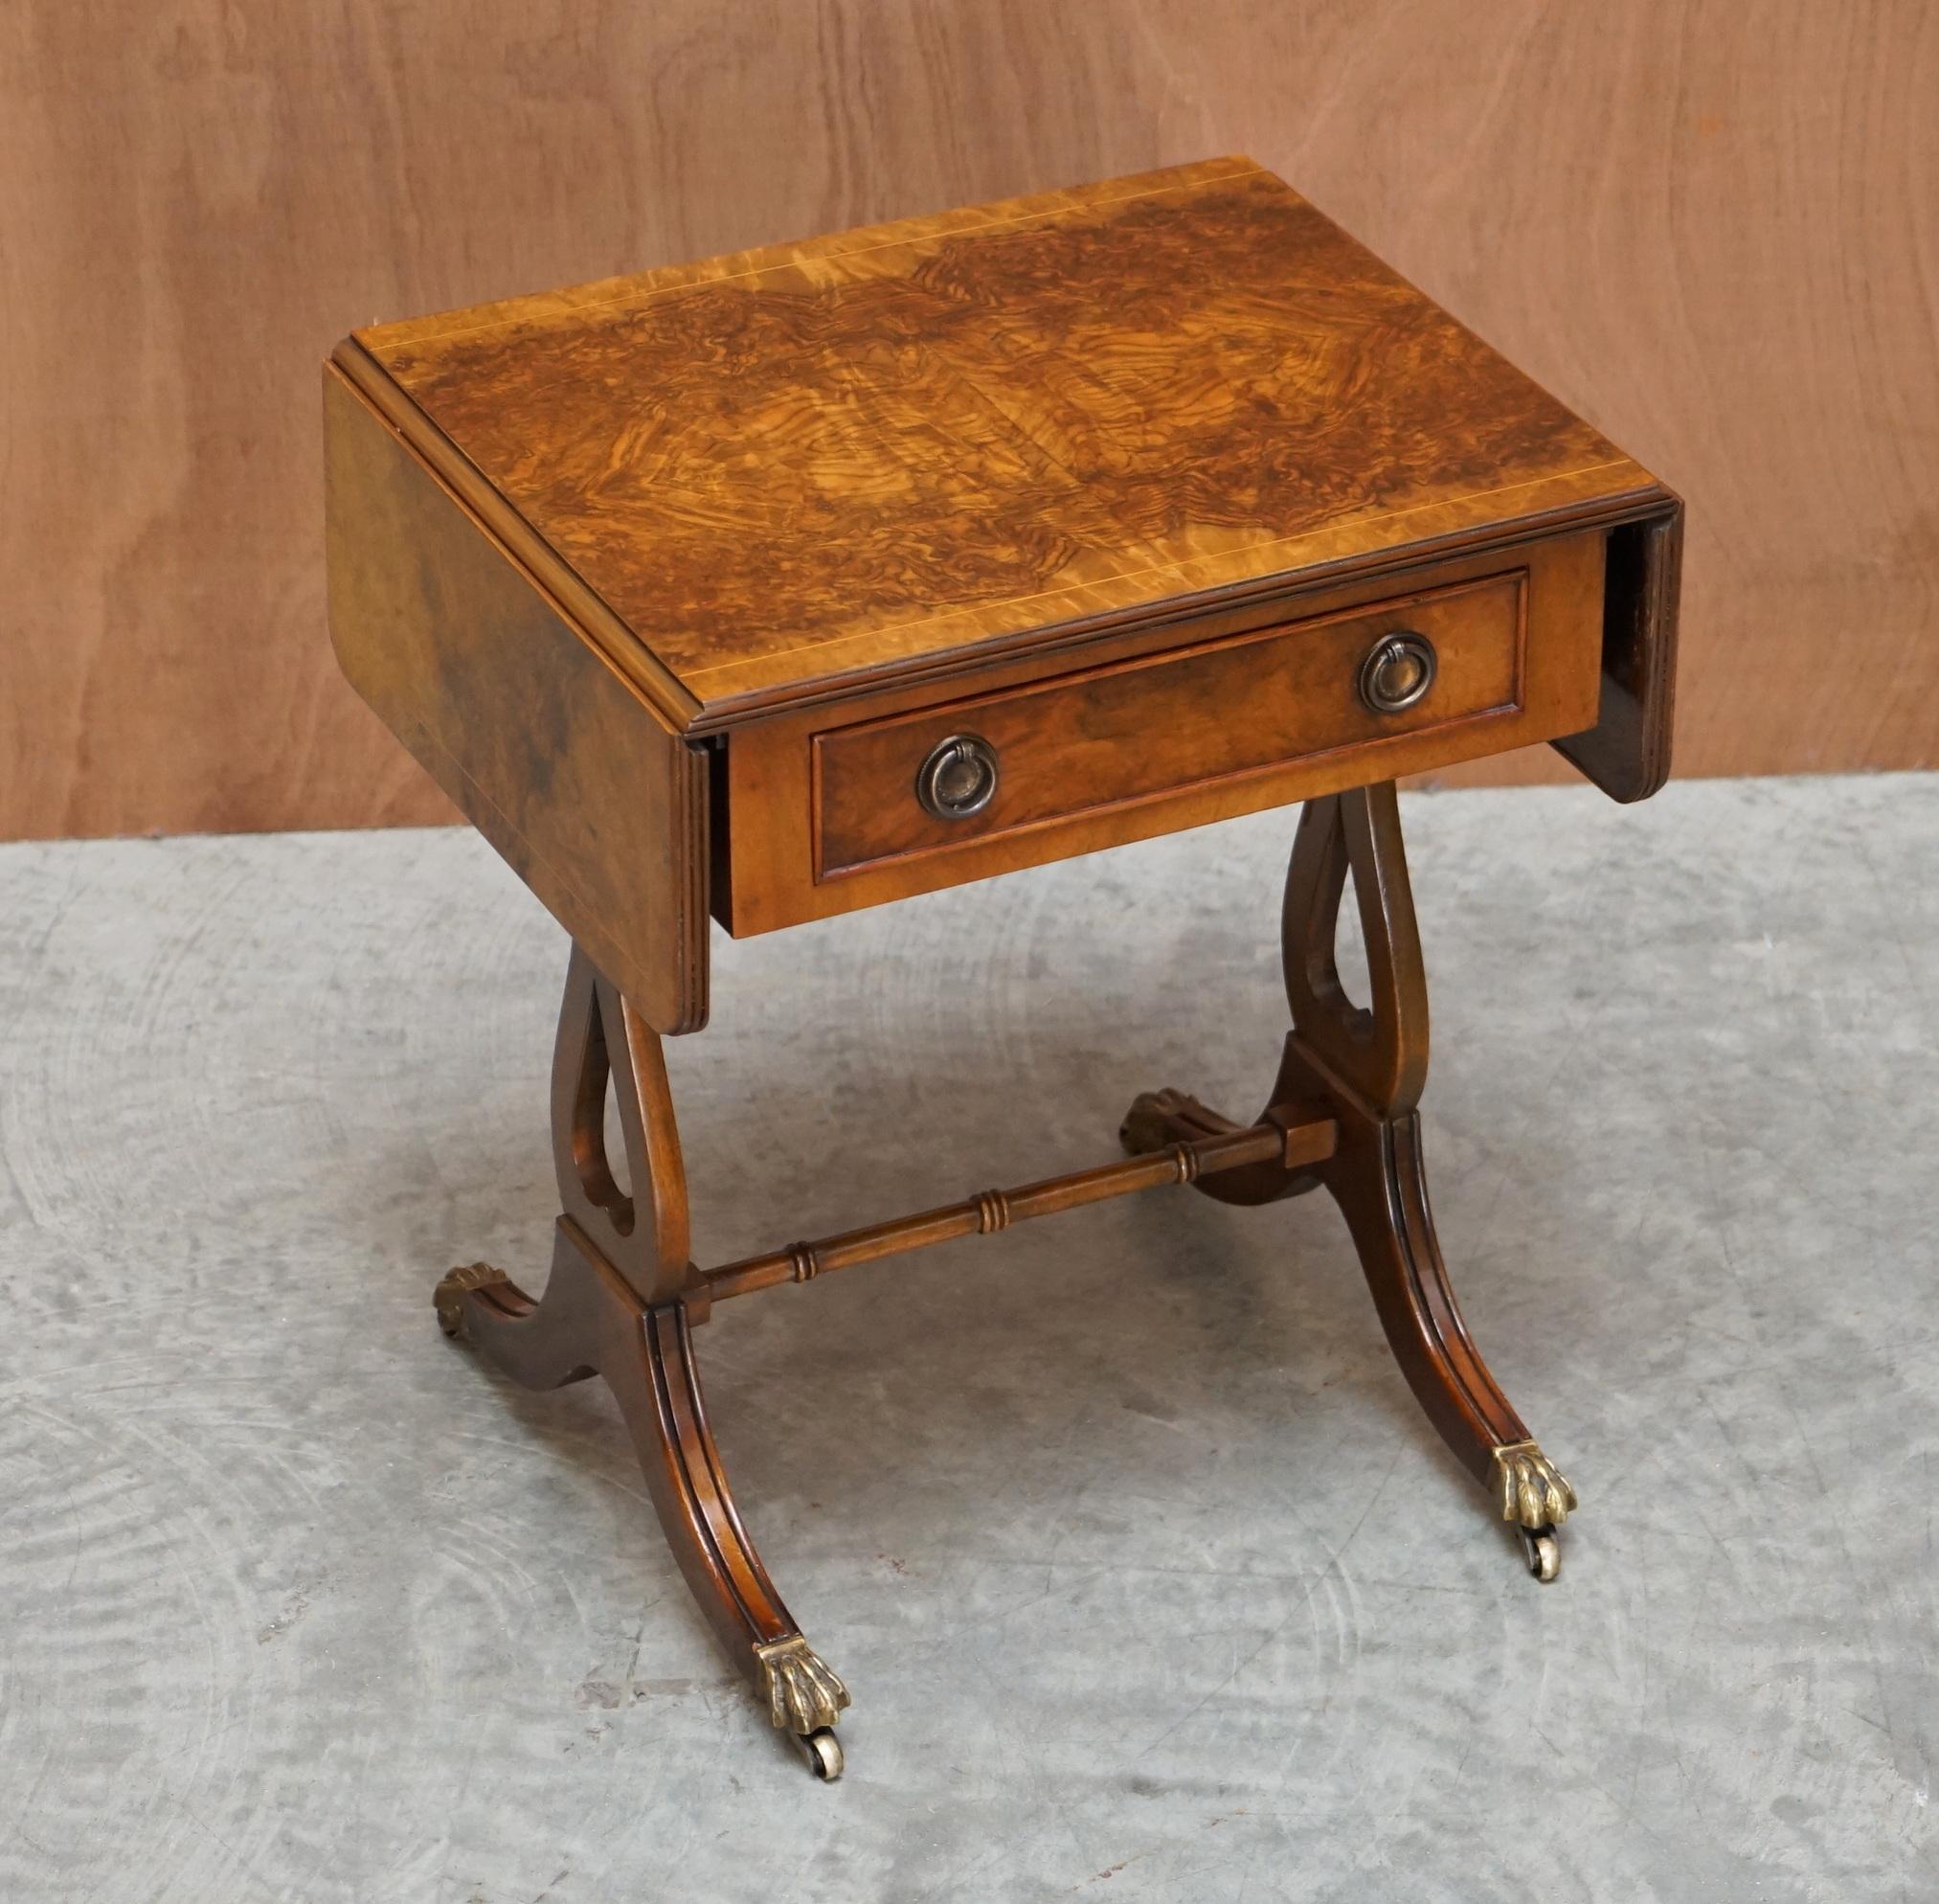 We are delighted to offer for sale this absolutely stunning restored, Bevan Funnell vintage Burr, Burl and Quarter cut walnut side table with extending top and single drawer.

This is the most beautiful version of this table I have ever seen, the